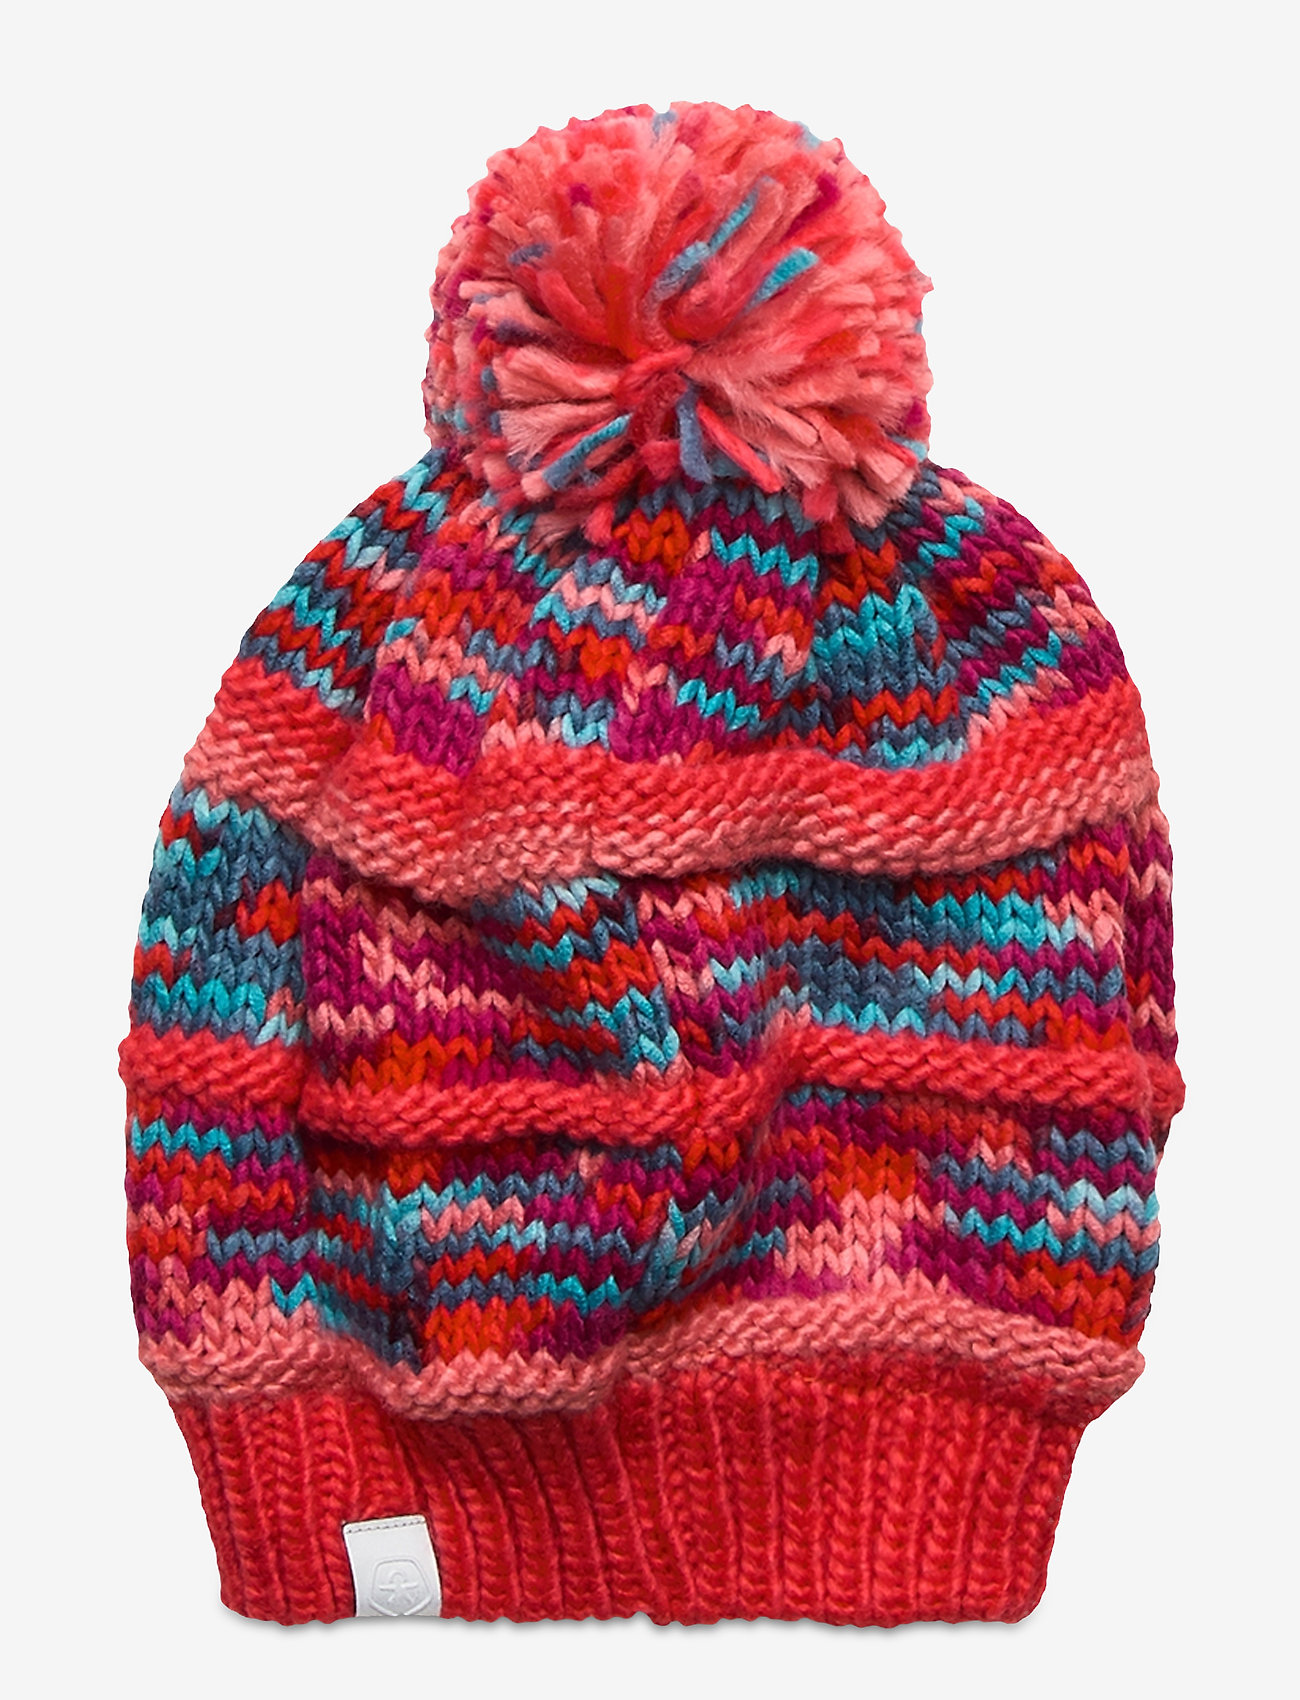 Color Kids - hat - lowest prices - coral red - 1